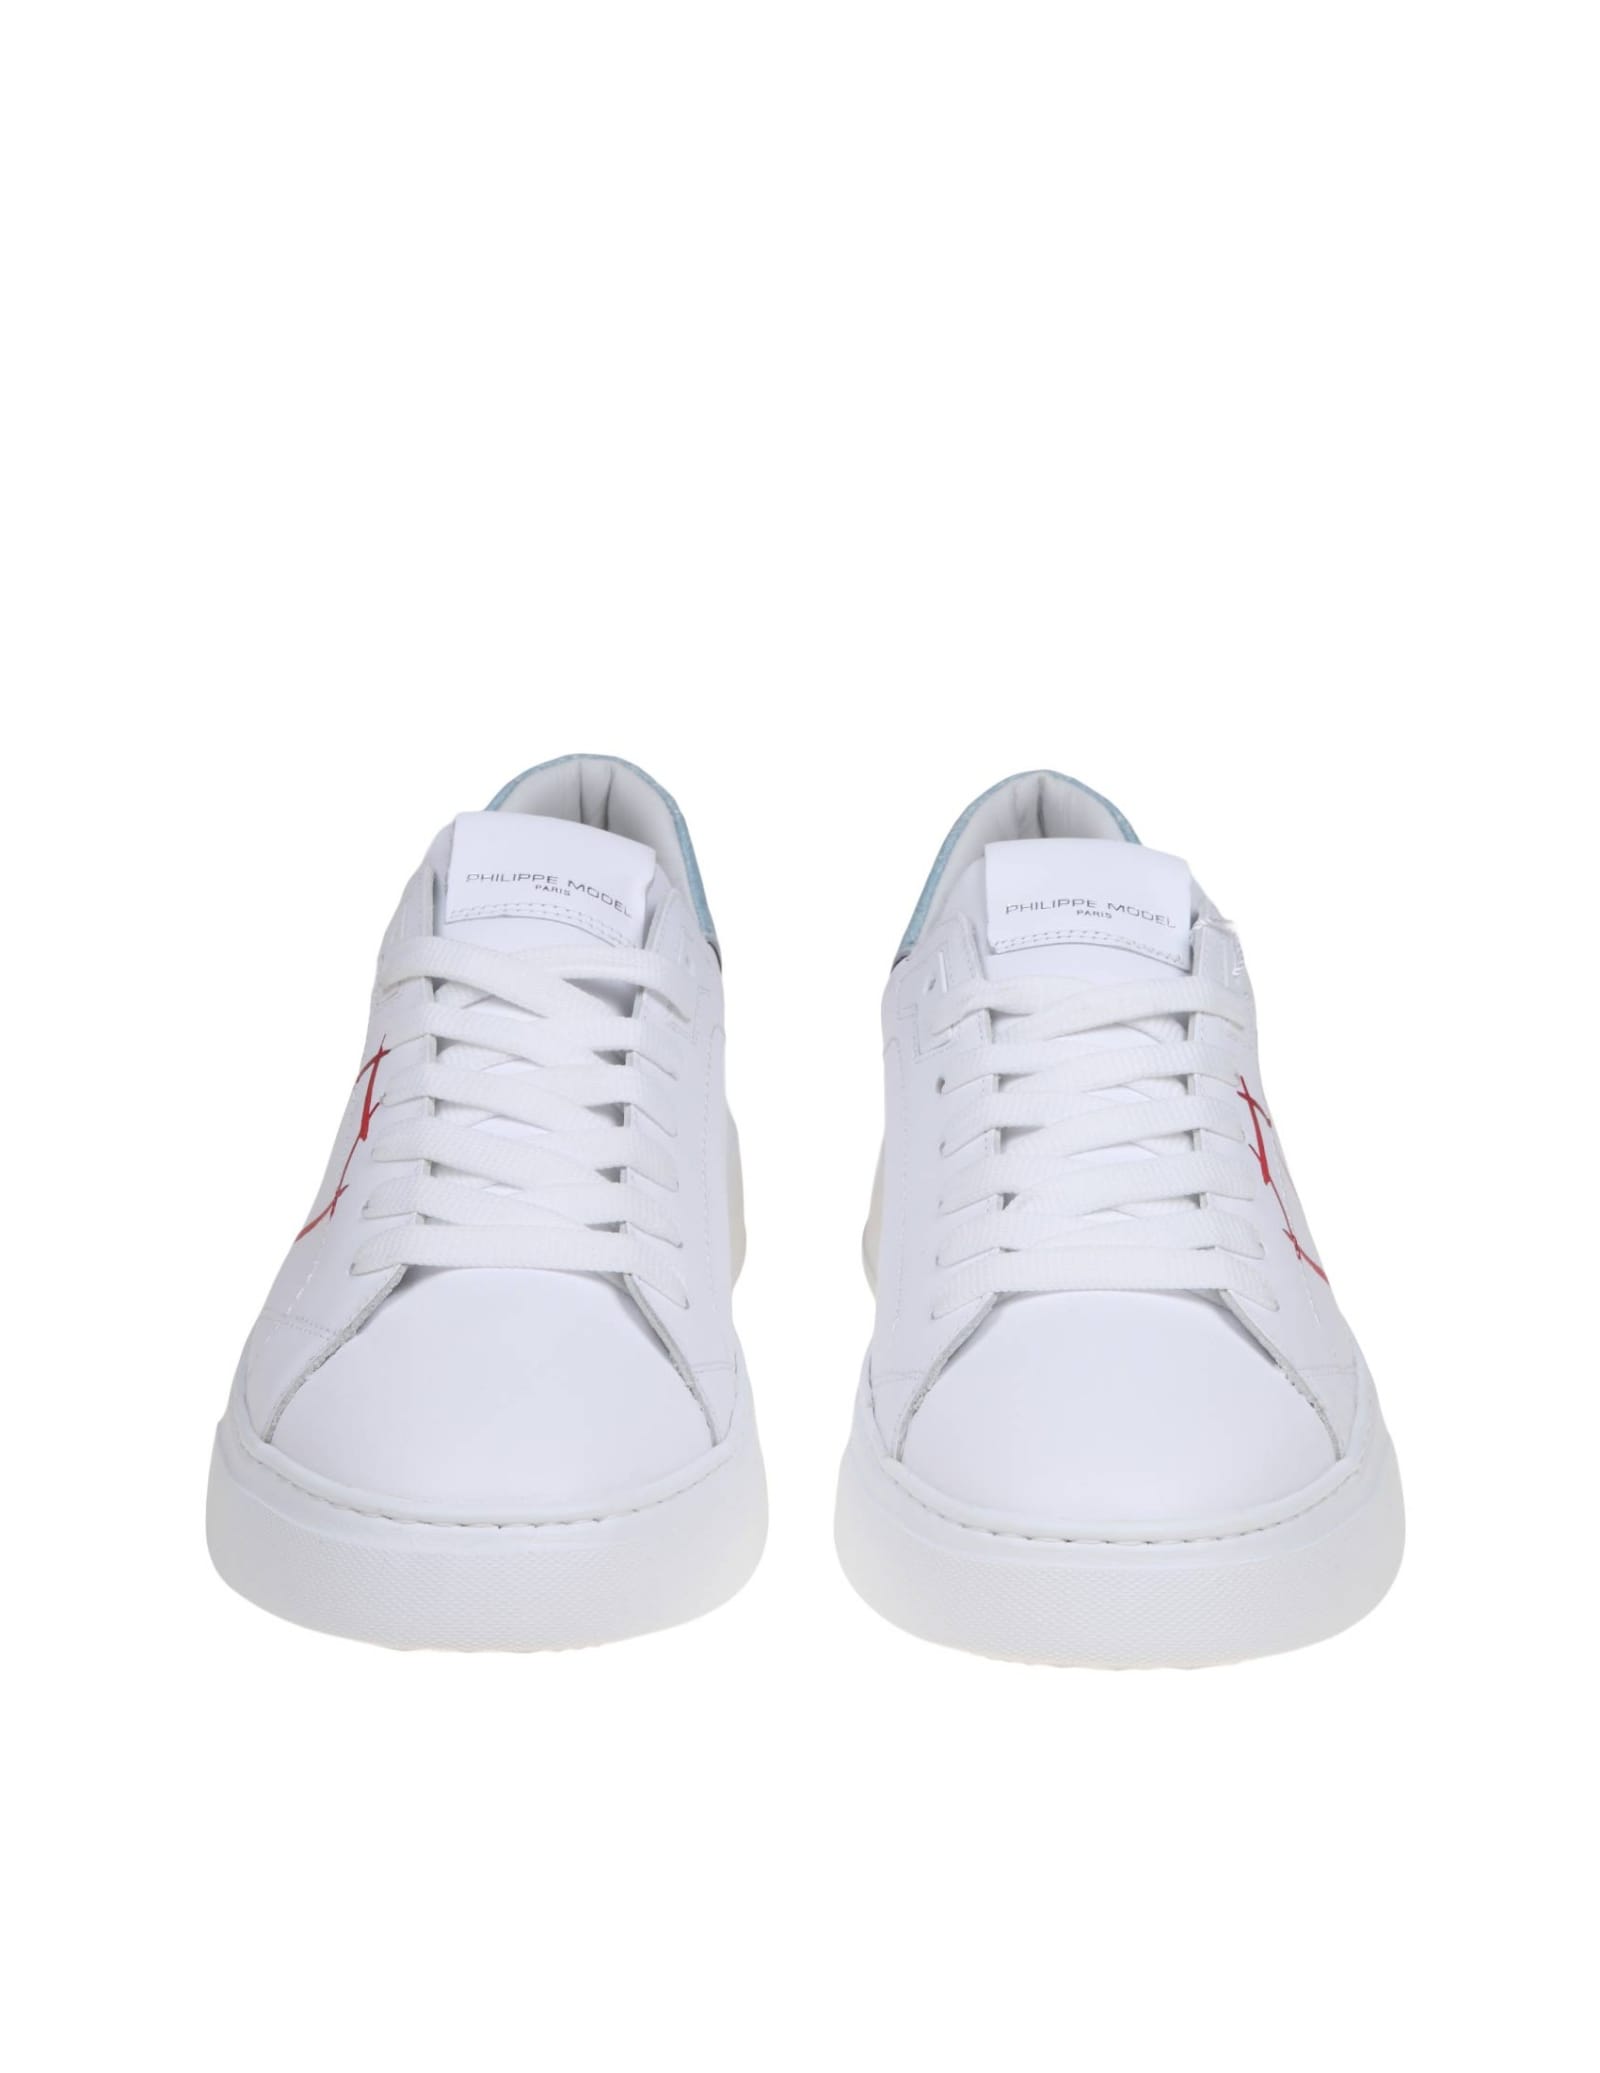 Shop Philippe Model Temple Low Sneakers In White And Light Blue Leather In White/red